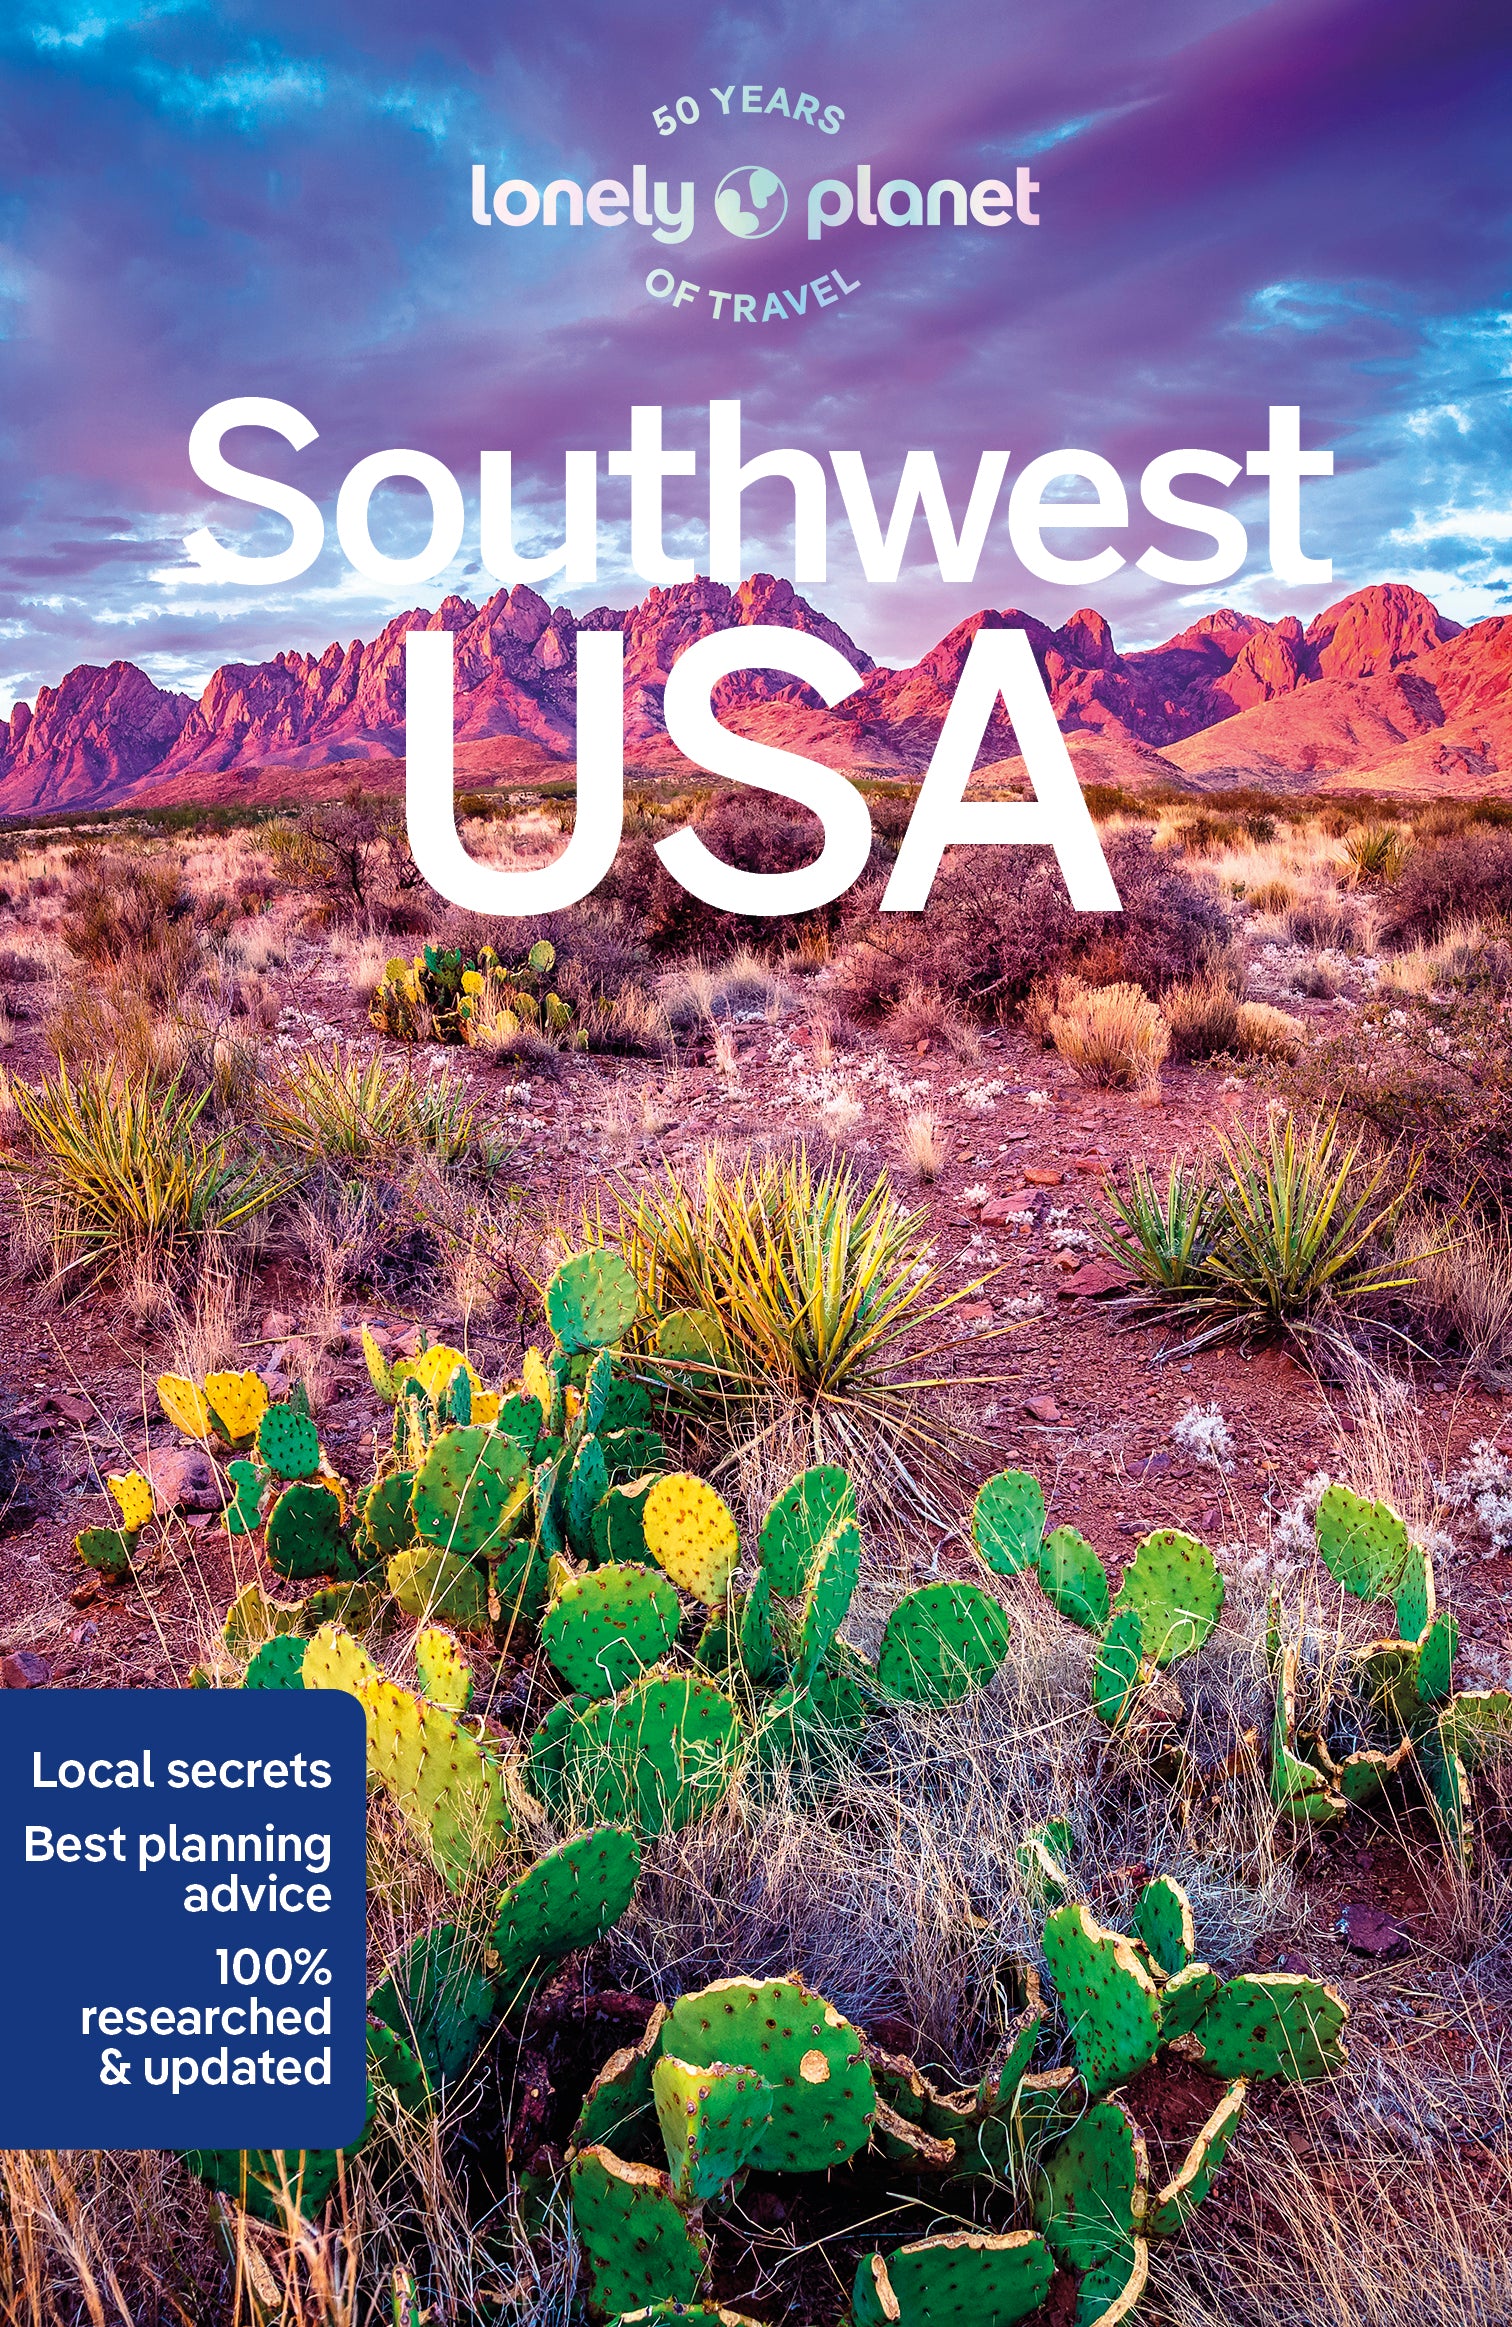 USA Travel Book and Ebook